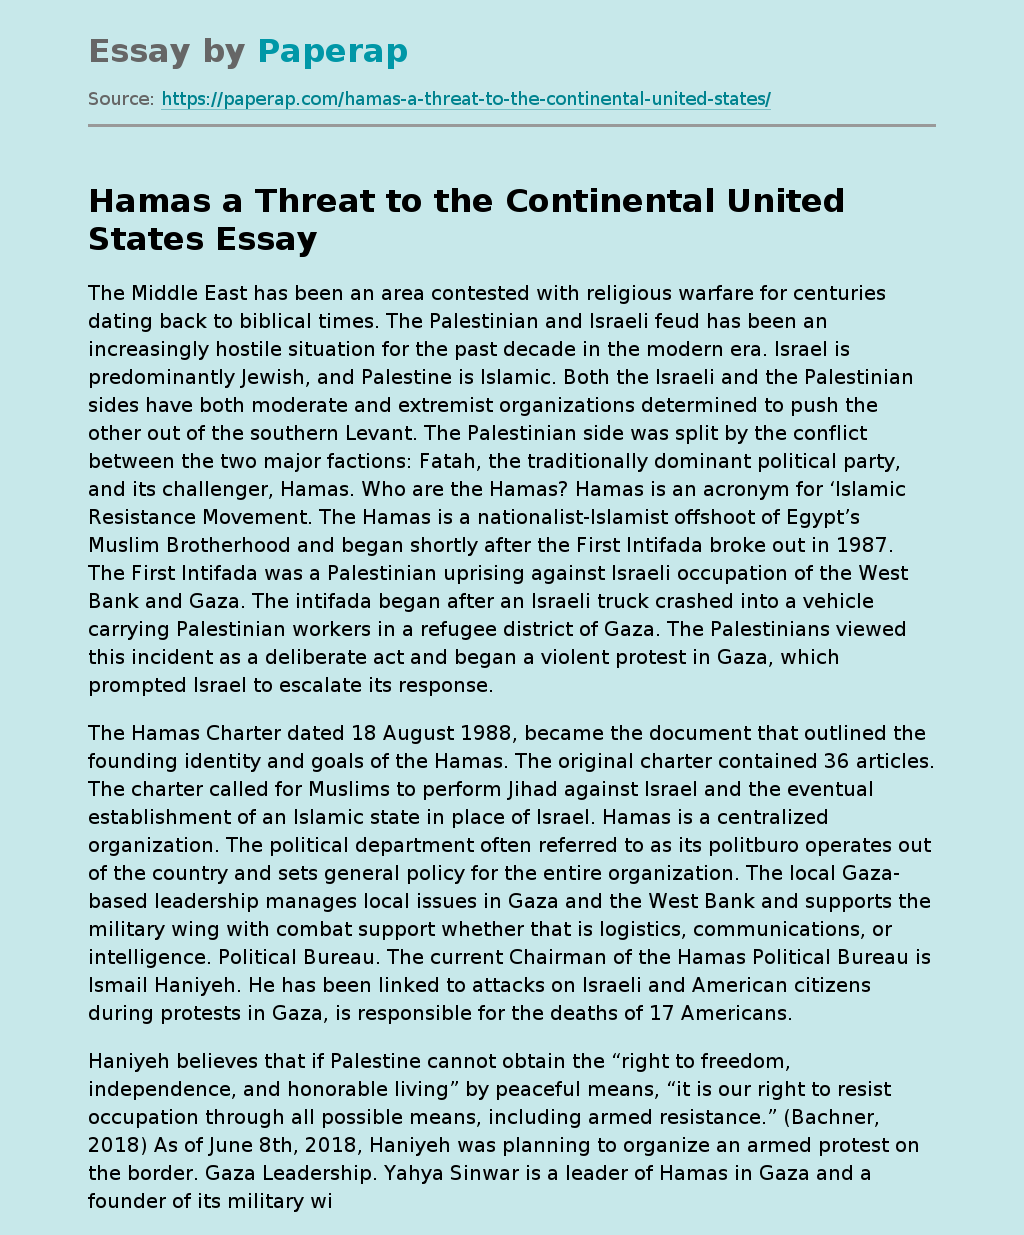 Hamas a Threat to the Continental United States